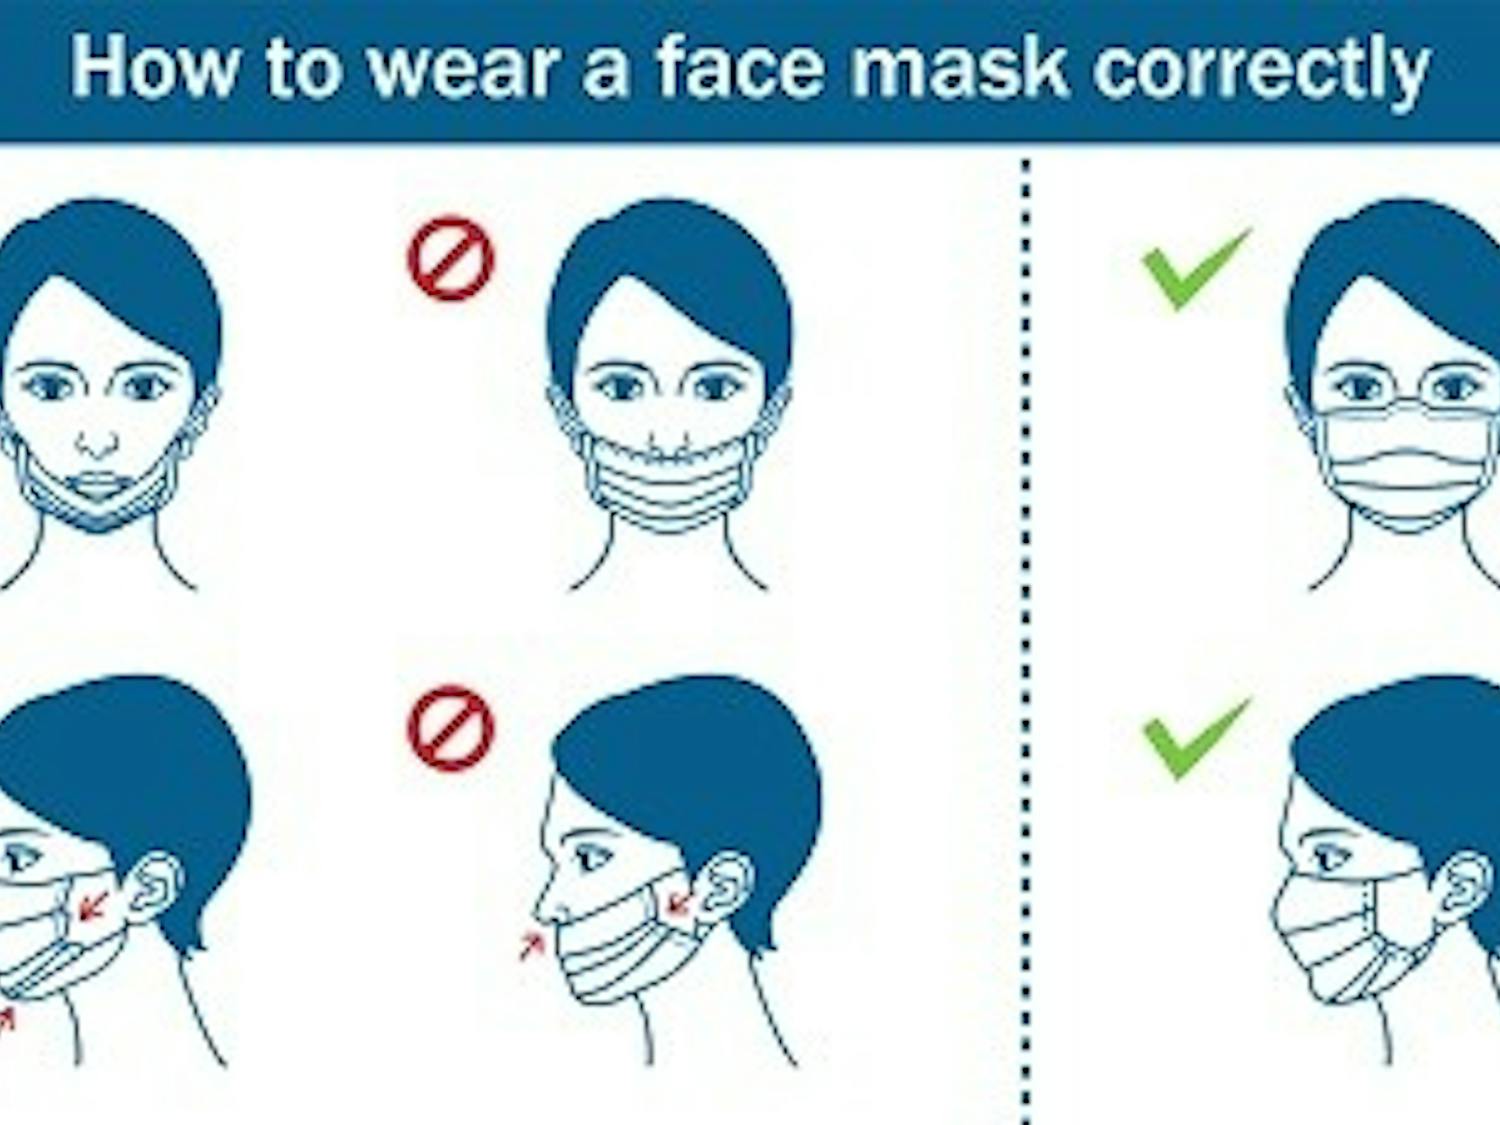 How-to-wear-a-mask.jpg